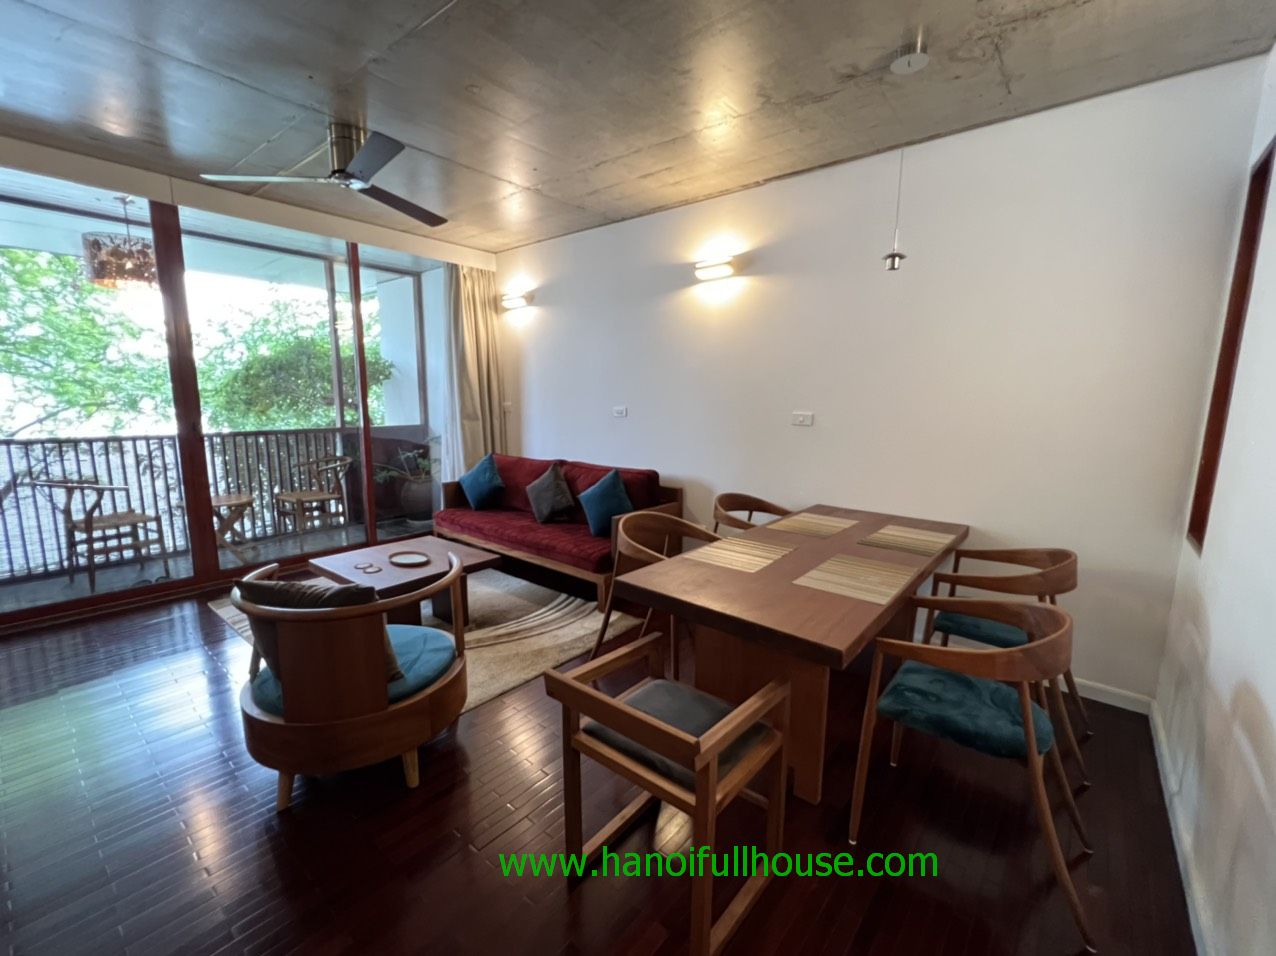 Hanoi duplex apartment with lake view is available 